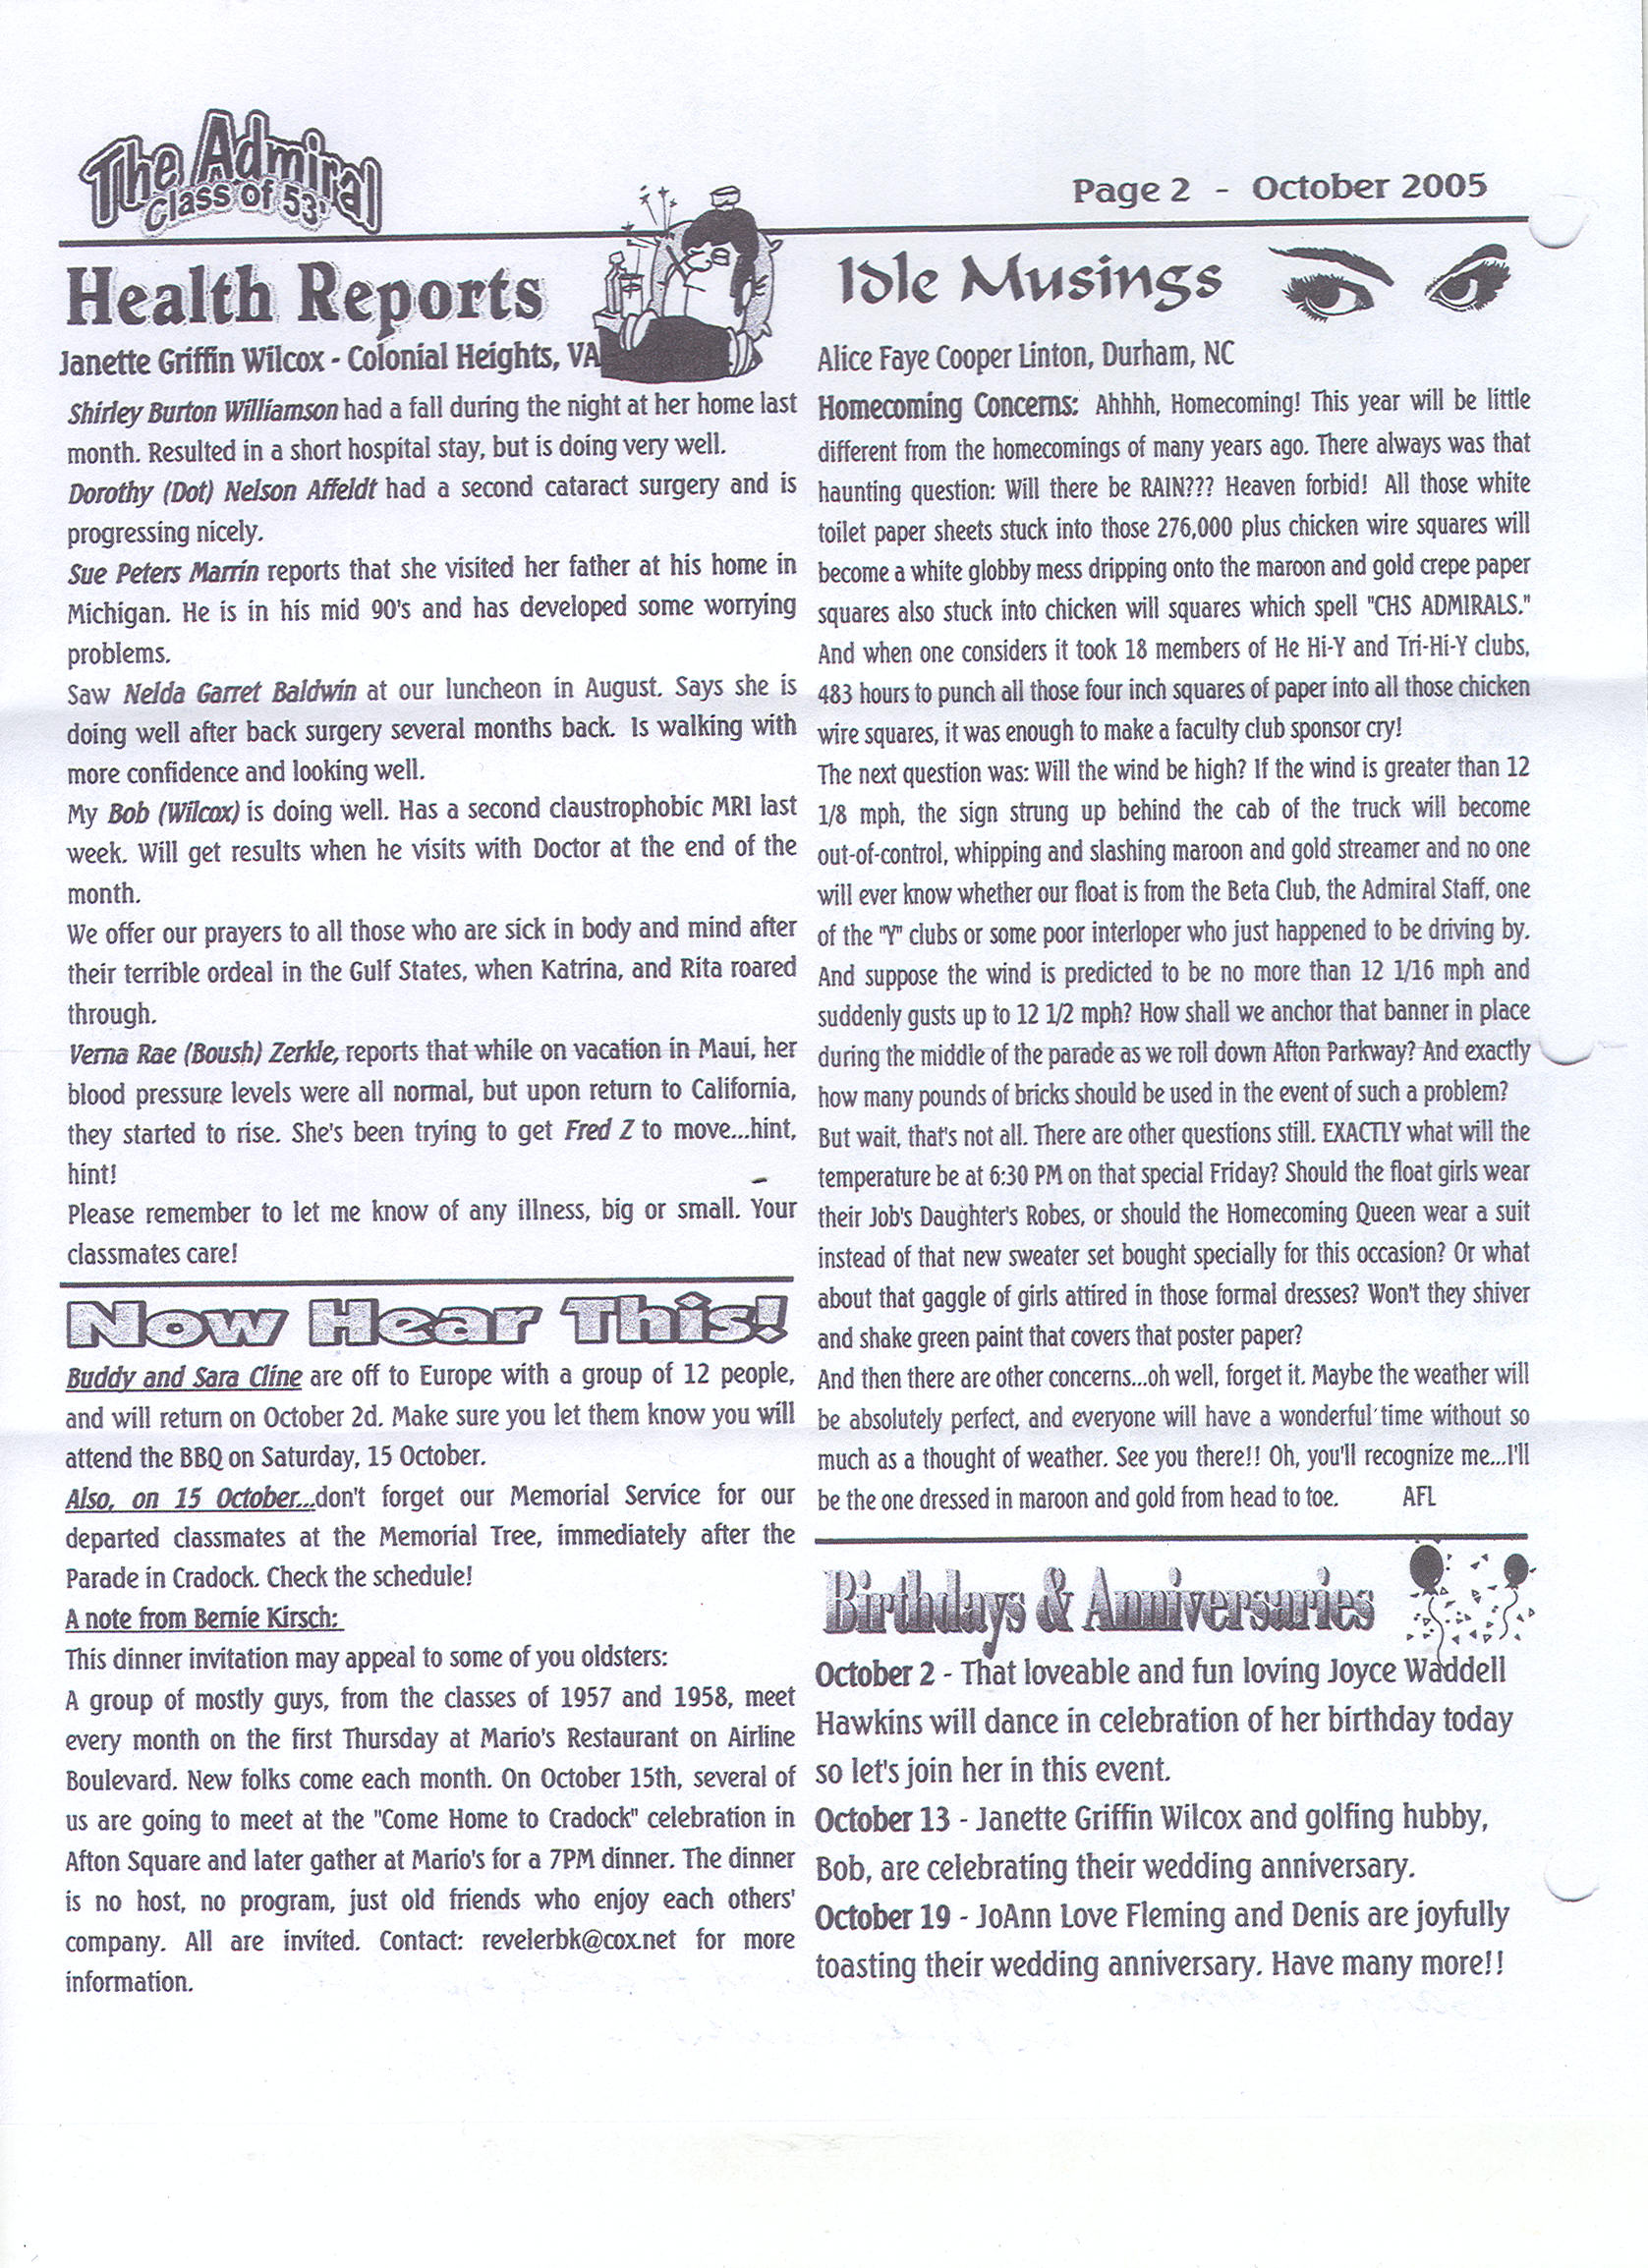 The Admiral - October 2005 - pg. 2